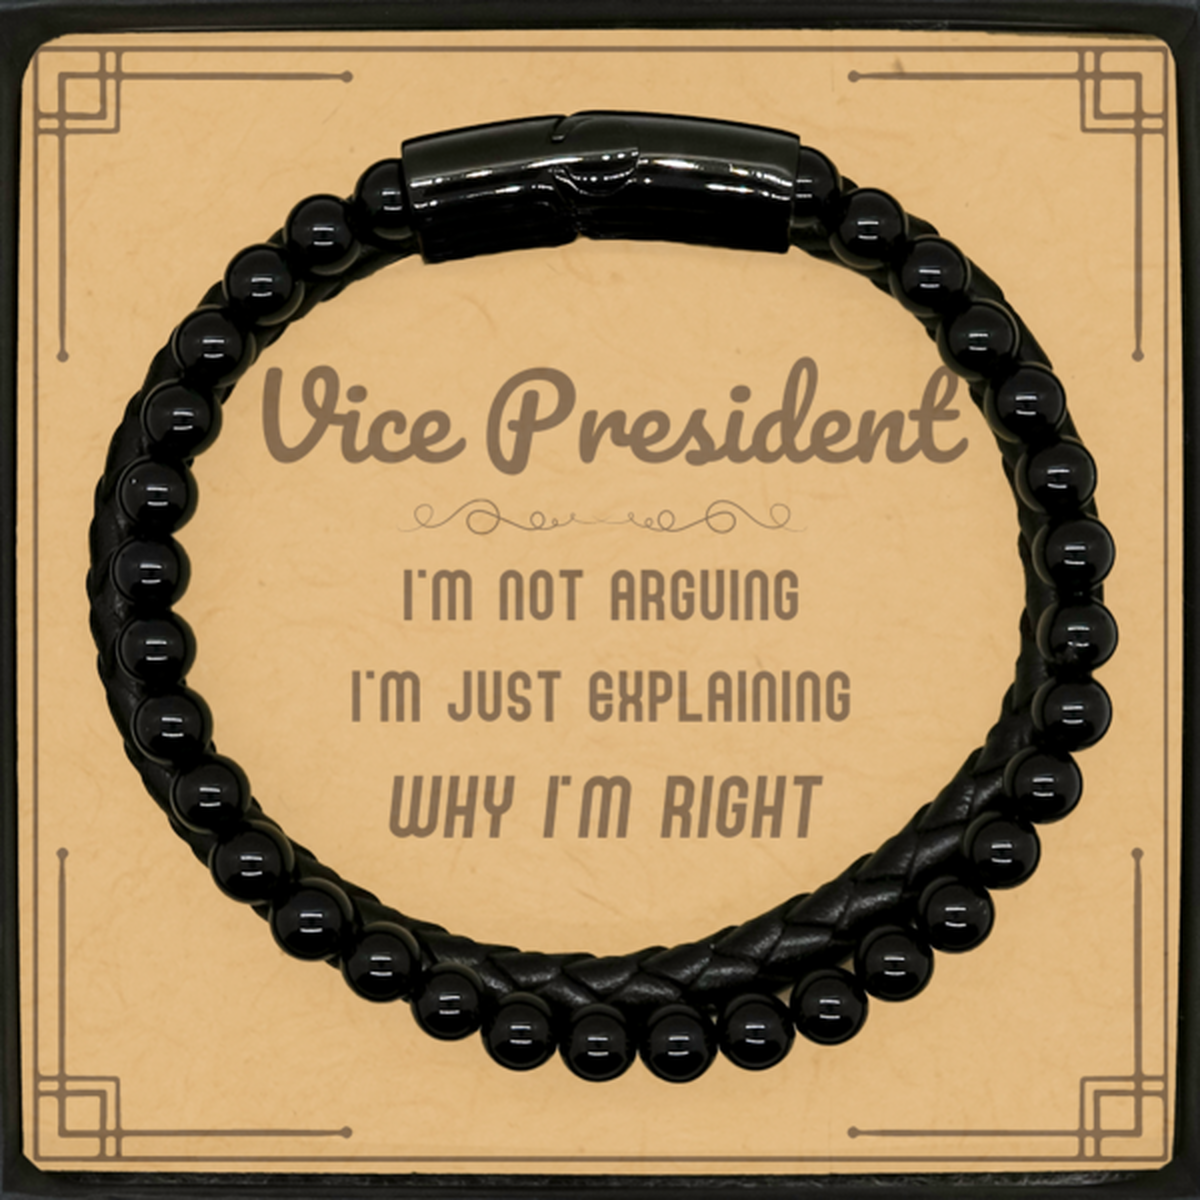 Vice President I'm not Arguing. I'm Just Explaining Why I'm RIGHT Stone Leather Bracelets, Funny Saying Quote Vice President Gifts For Vice President Message Card Graduation Birthday Christmas Gifts for Men Women Coworker